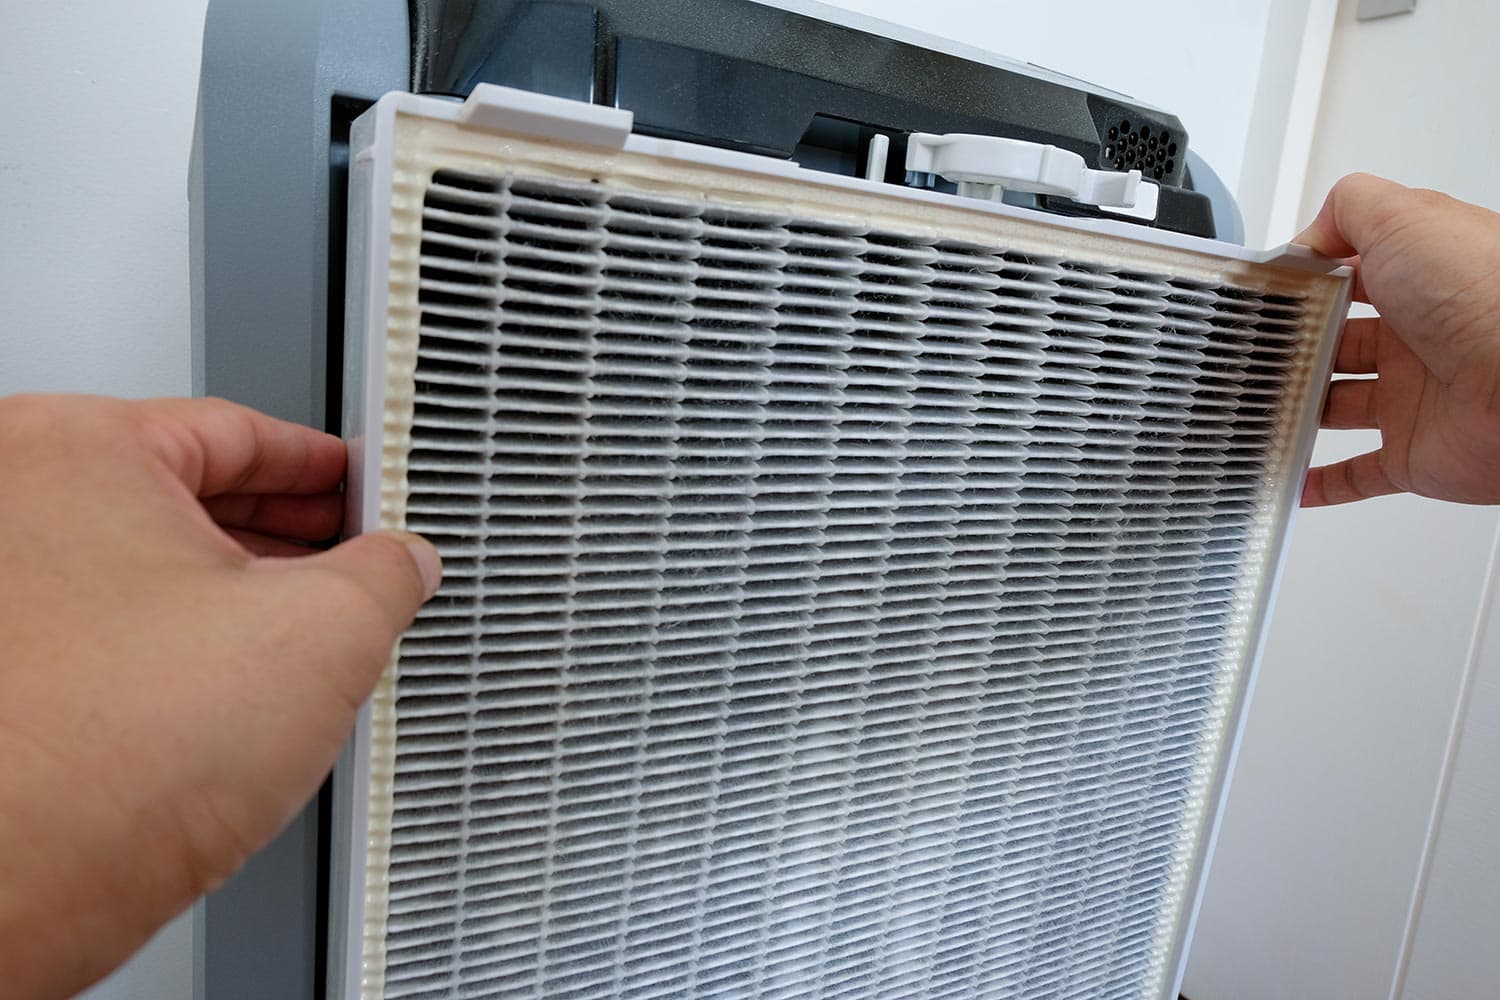 Replace and clean the hepa filter